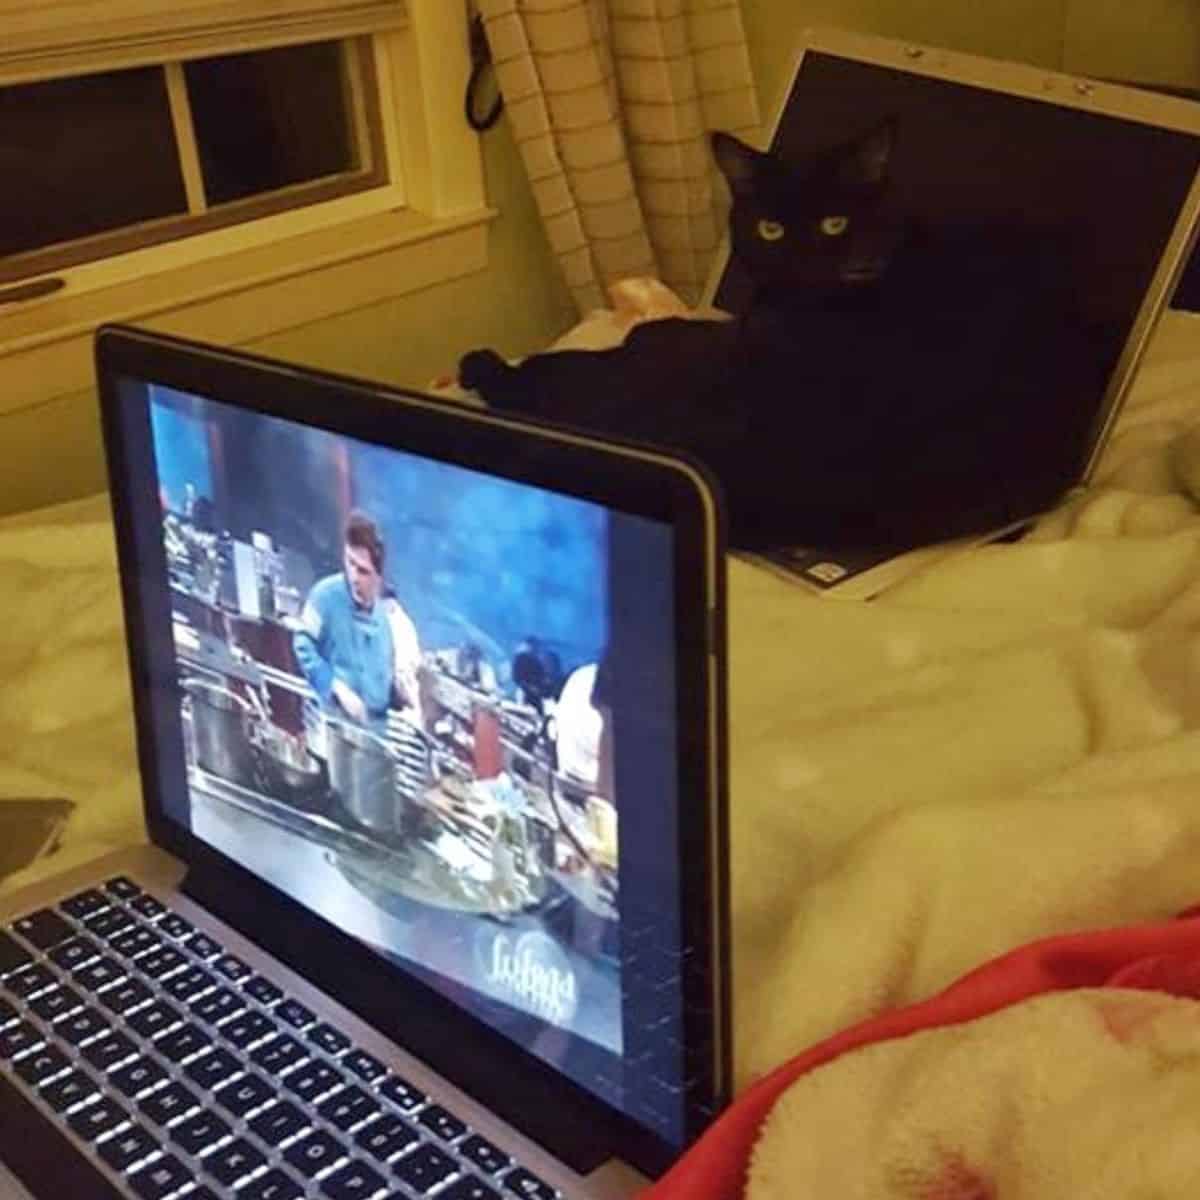 cat on the bed with laptop